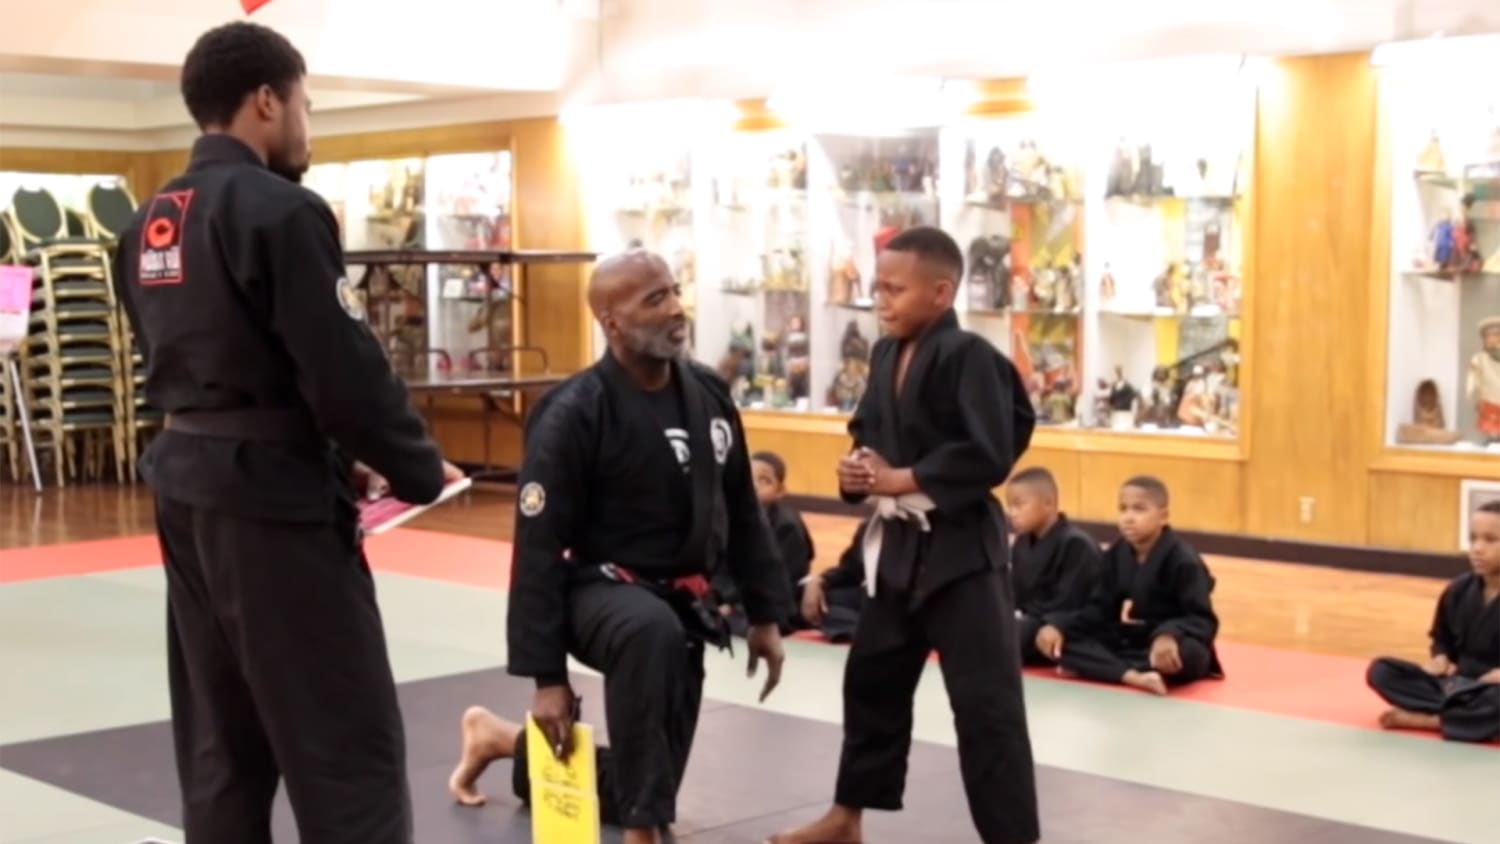 Martial arts teacher consoles tearful boy, reminds us all 'it's OK